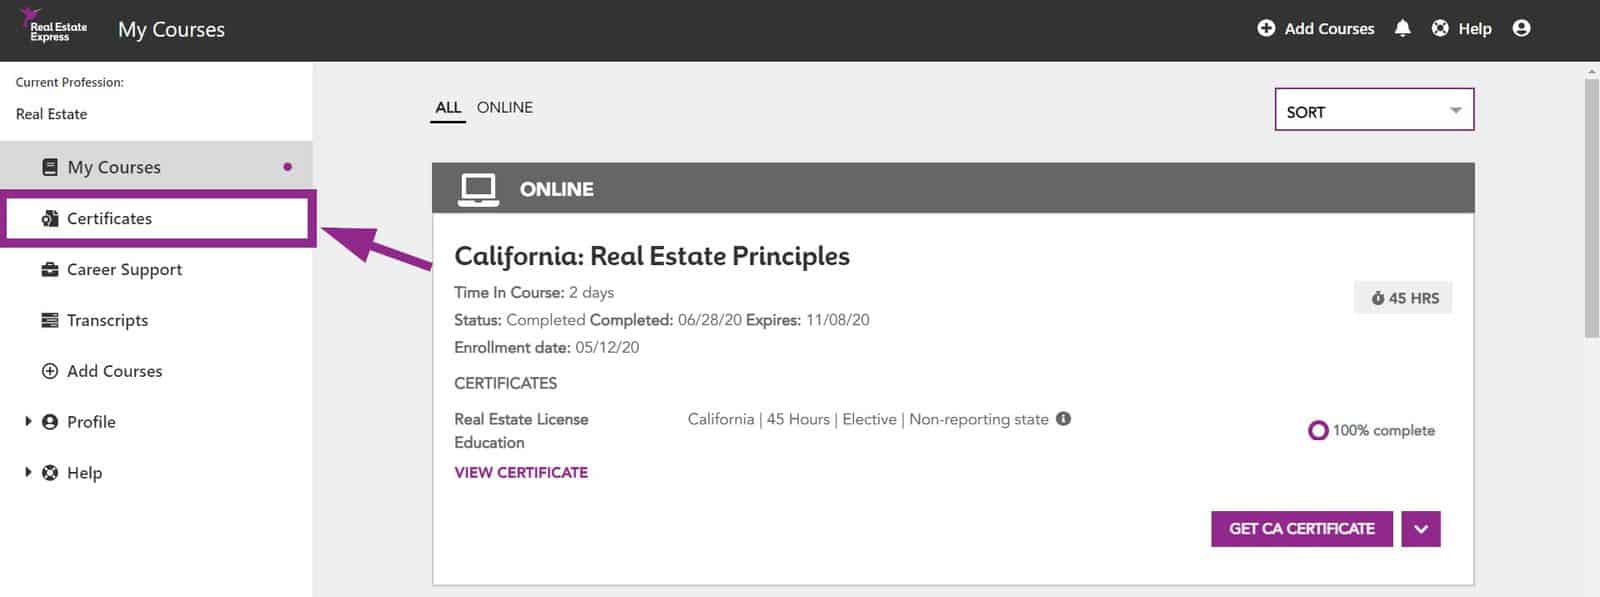 California: Real Estate Principles certificate from Real Estate Express.